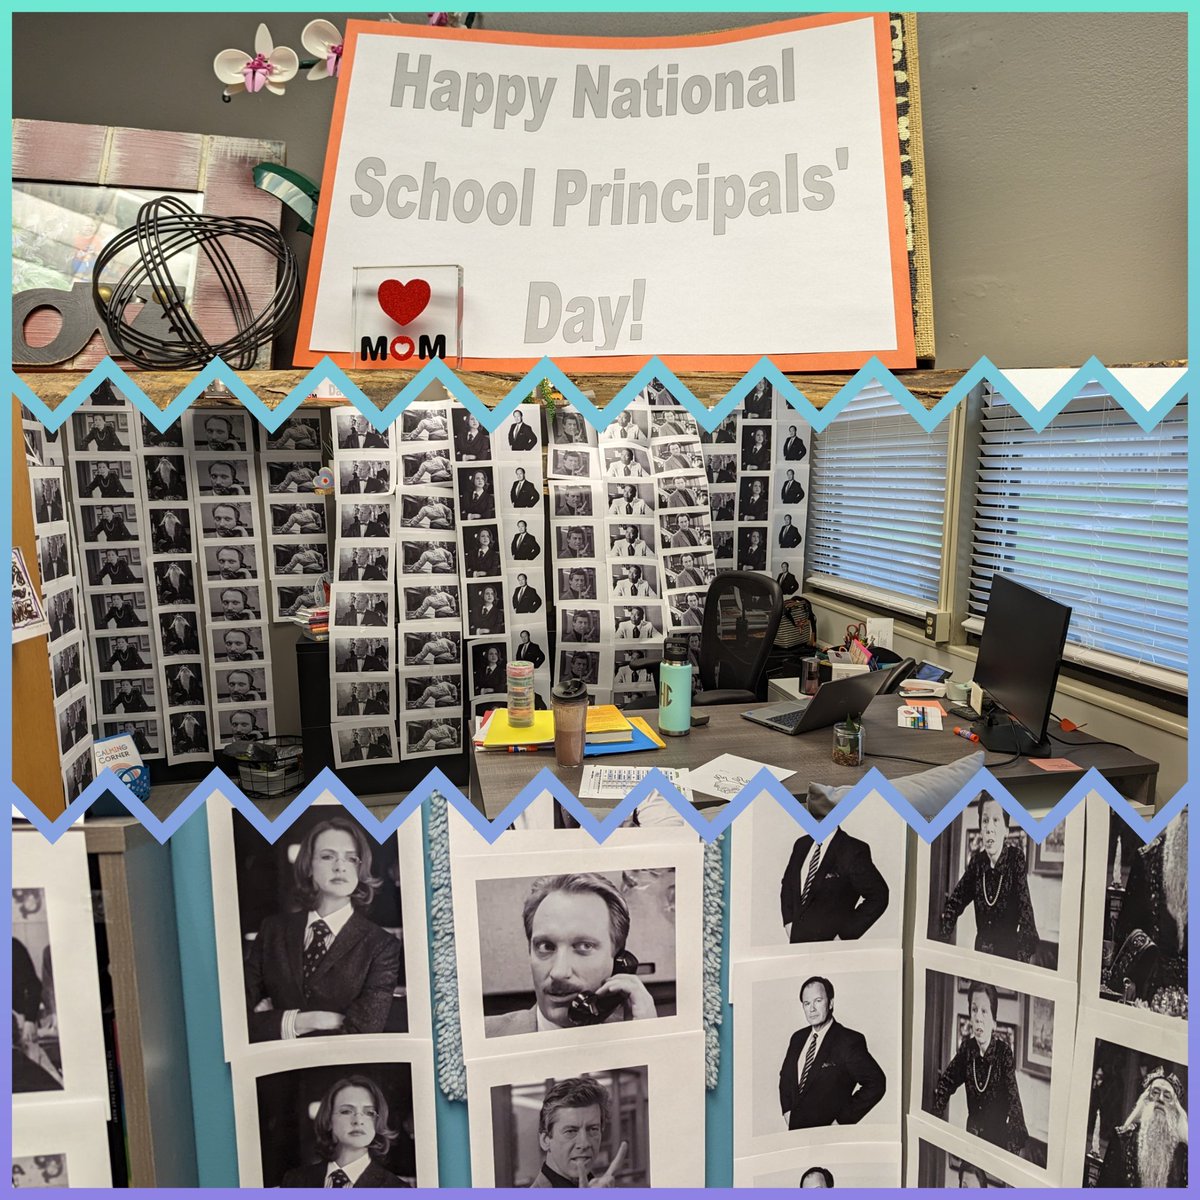 I work with the best staff @115ygs and I love their sense of humor! Thank you for making School Principal's Day amazing!